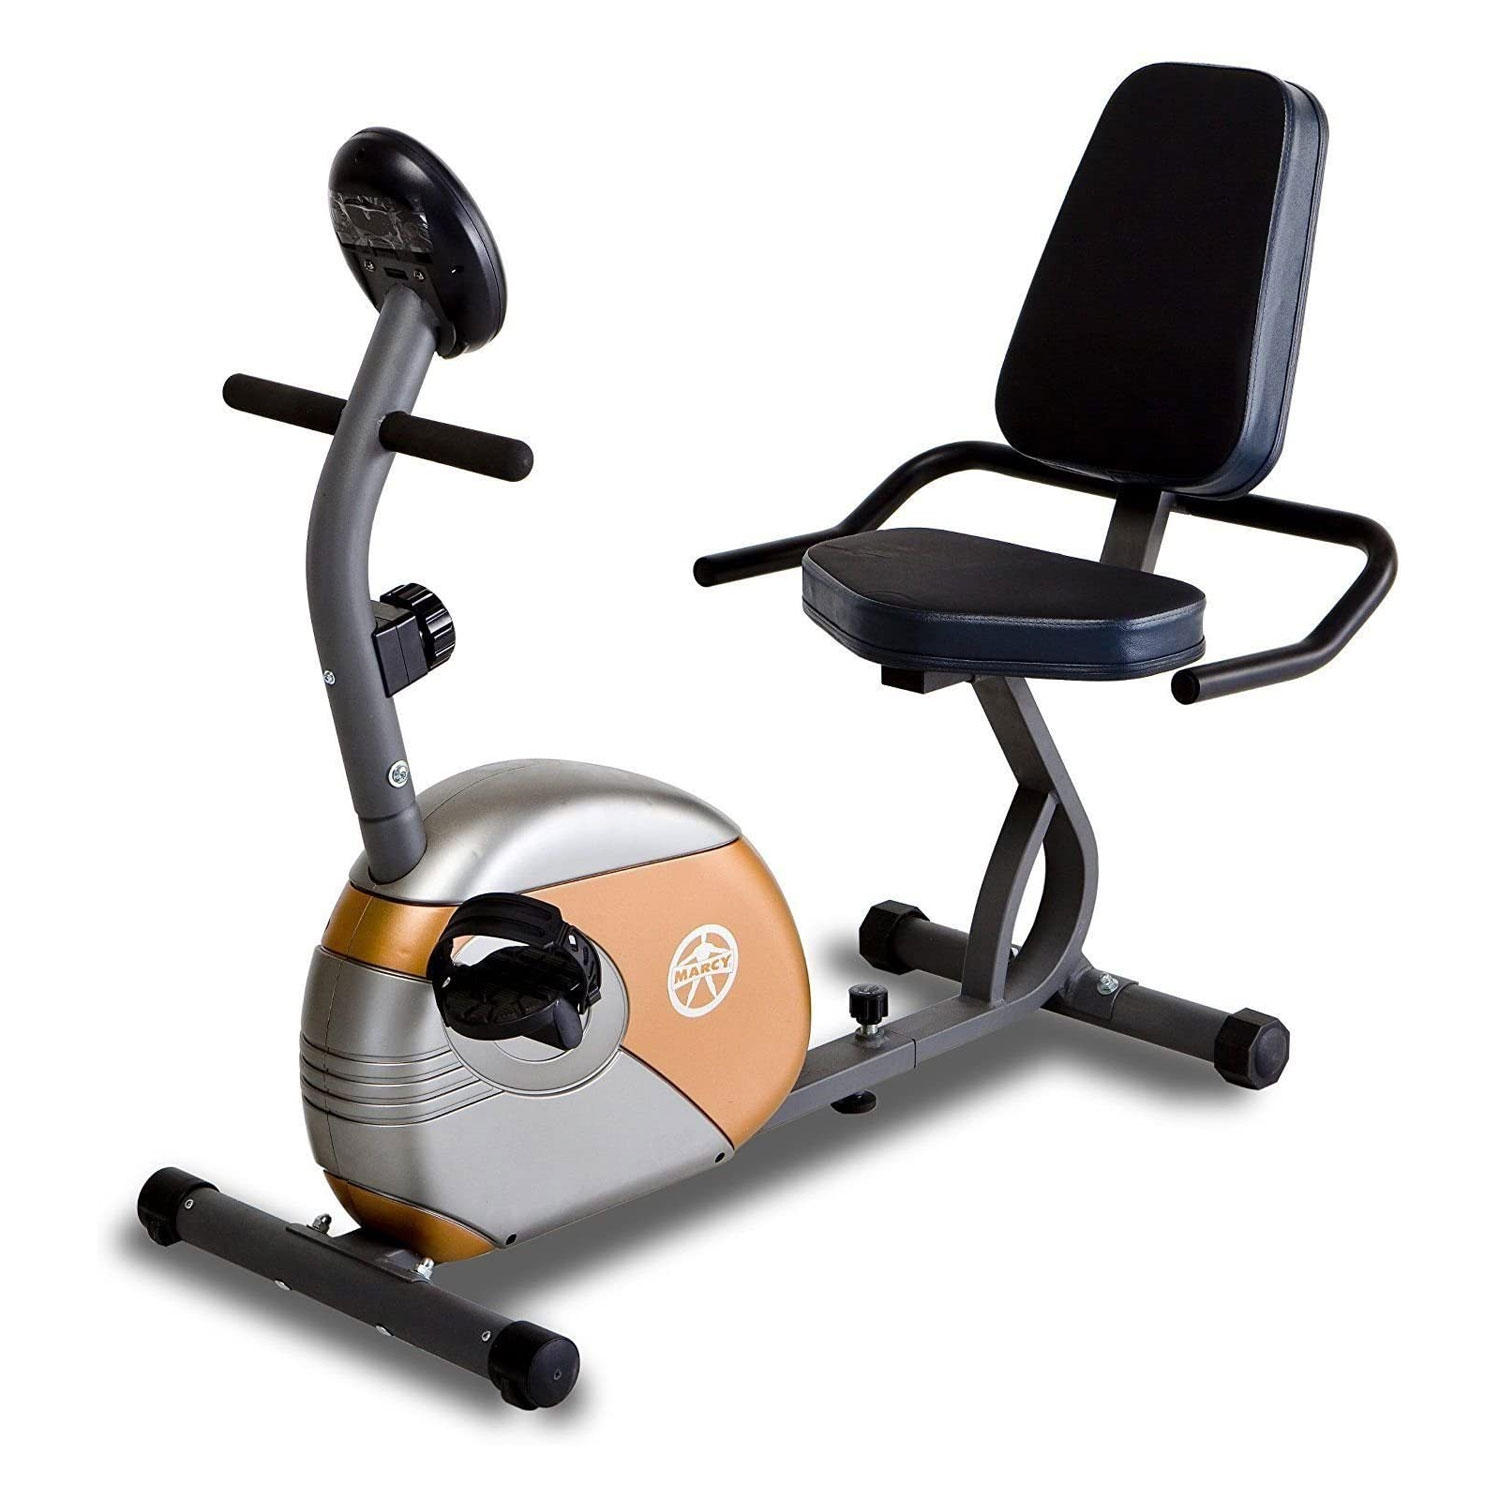 Marcy ME709 Recumbent Magnetic Exercise Bike Cycling Home Gym Equipment - image 1 of 5